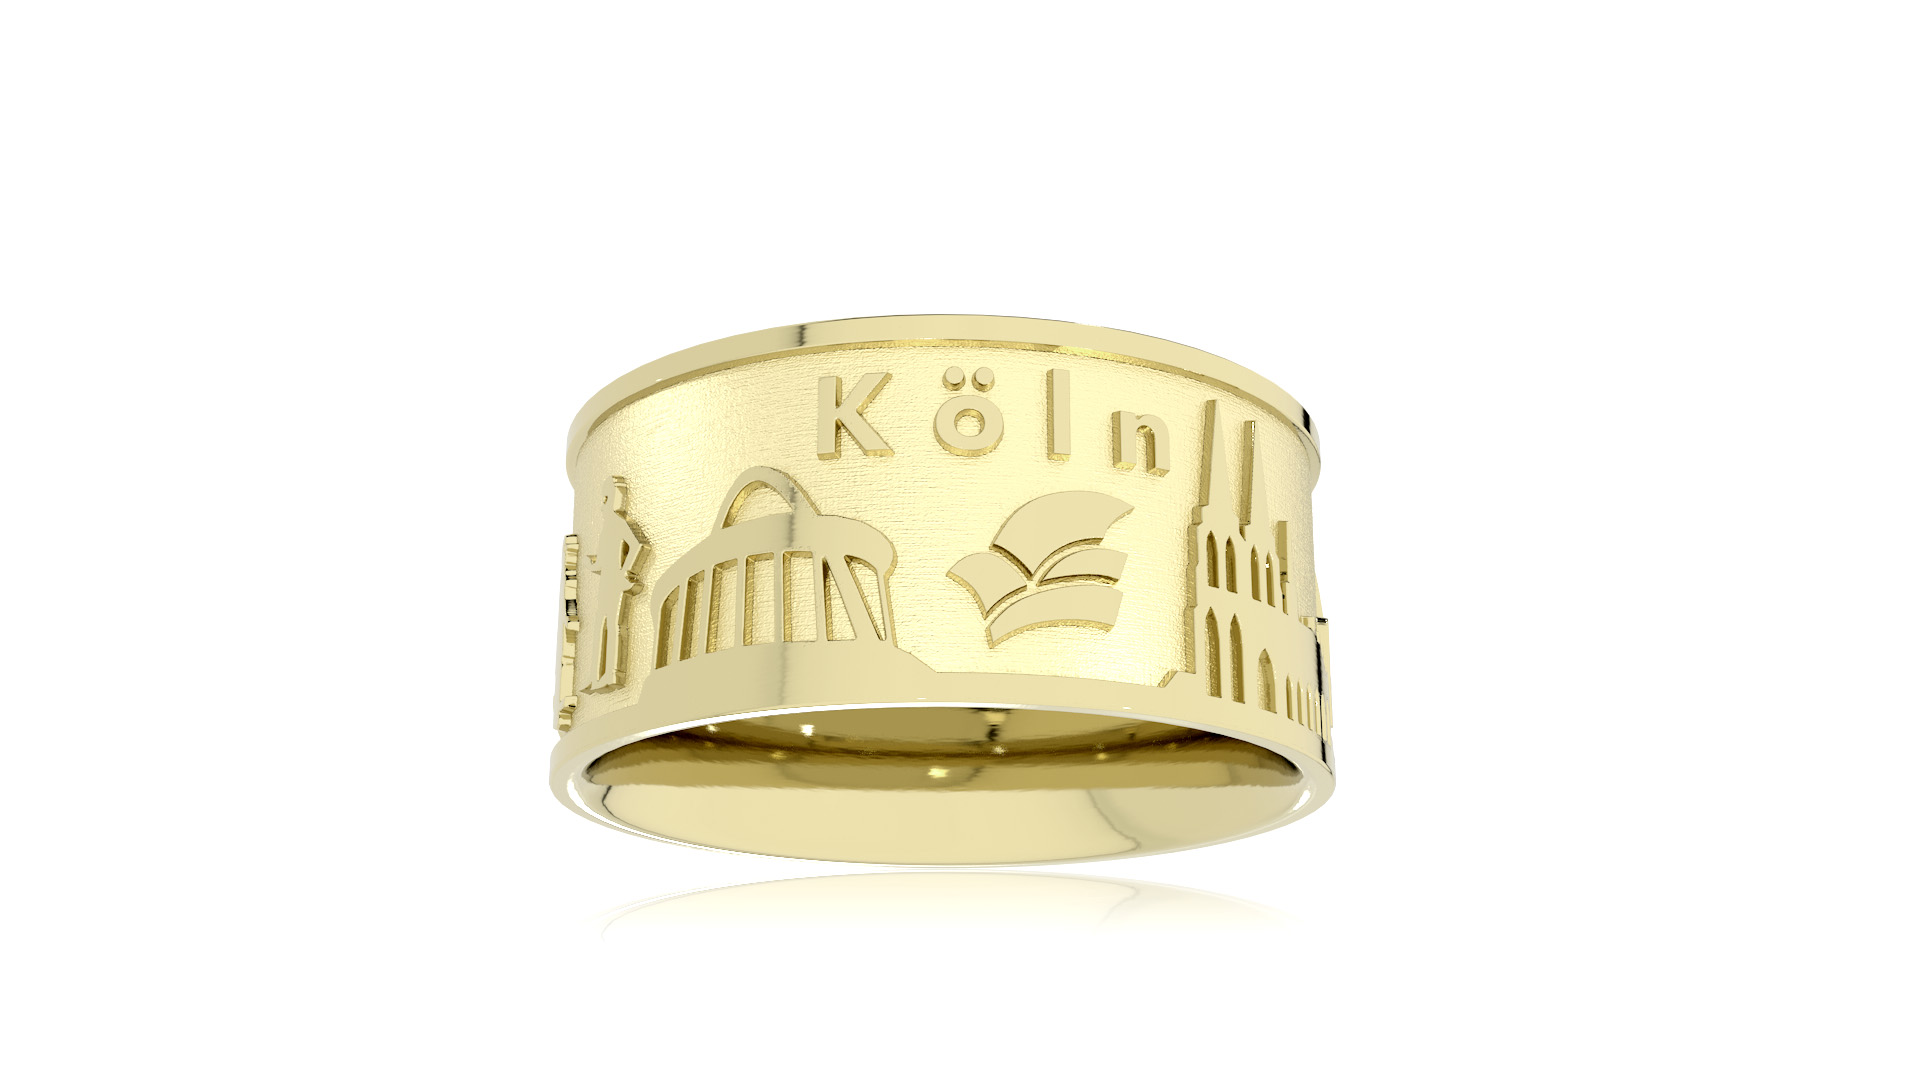 City ring Cologne 585 yellow gold 10 mm wide